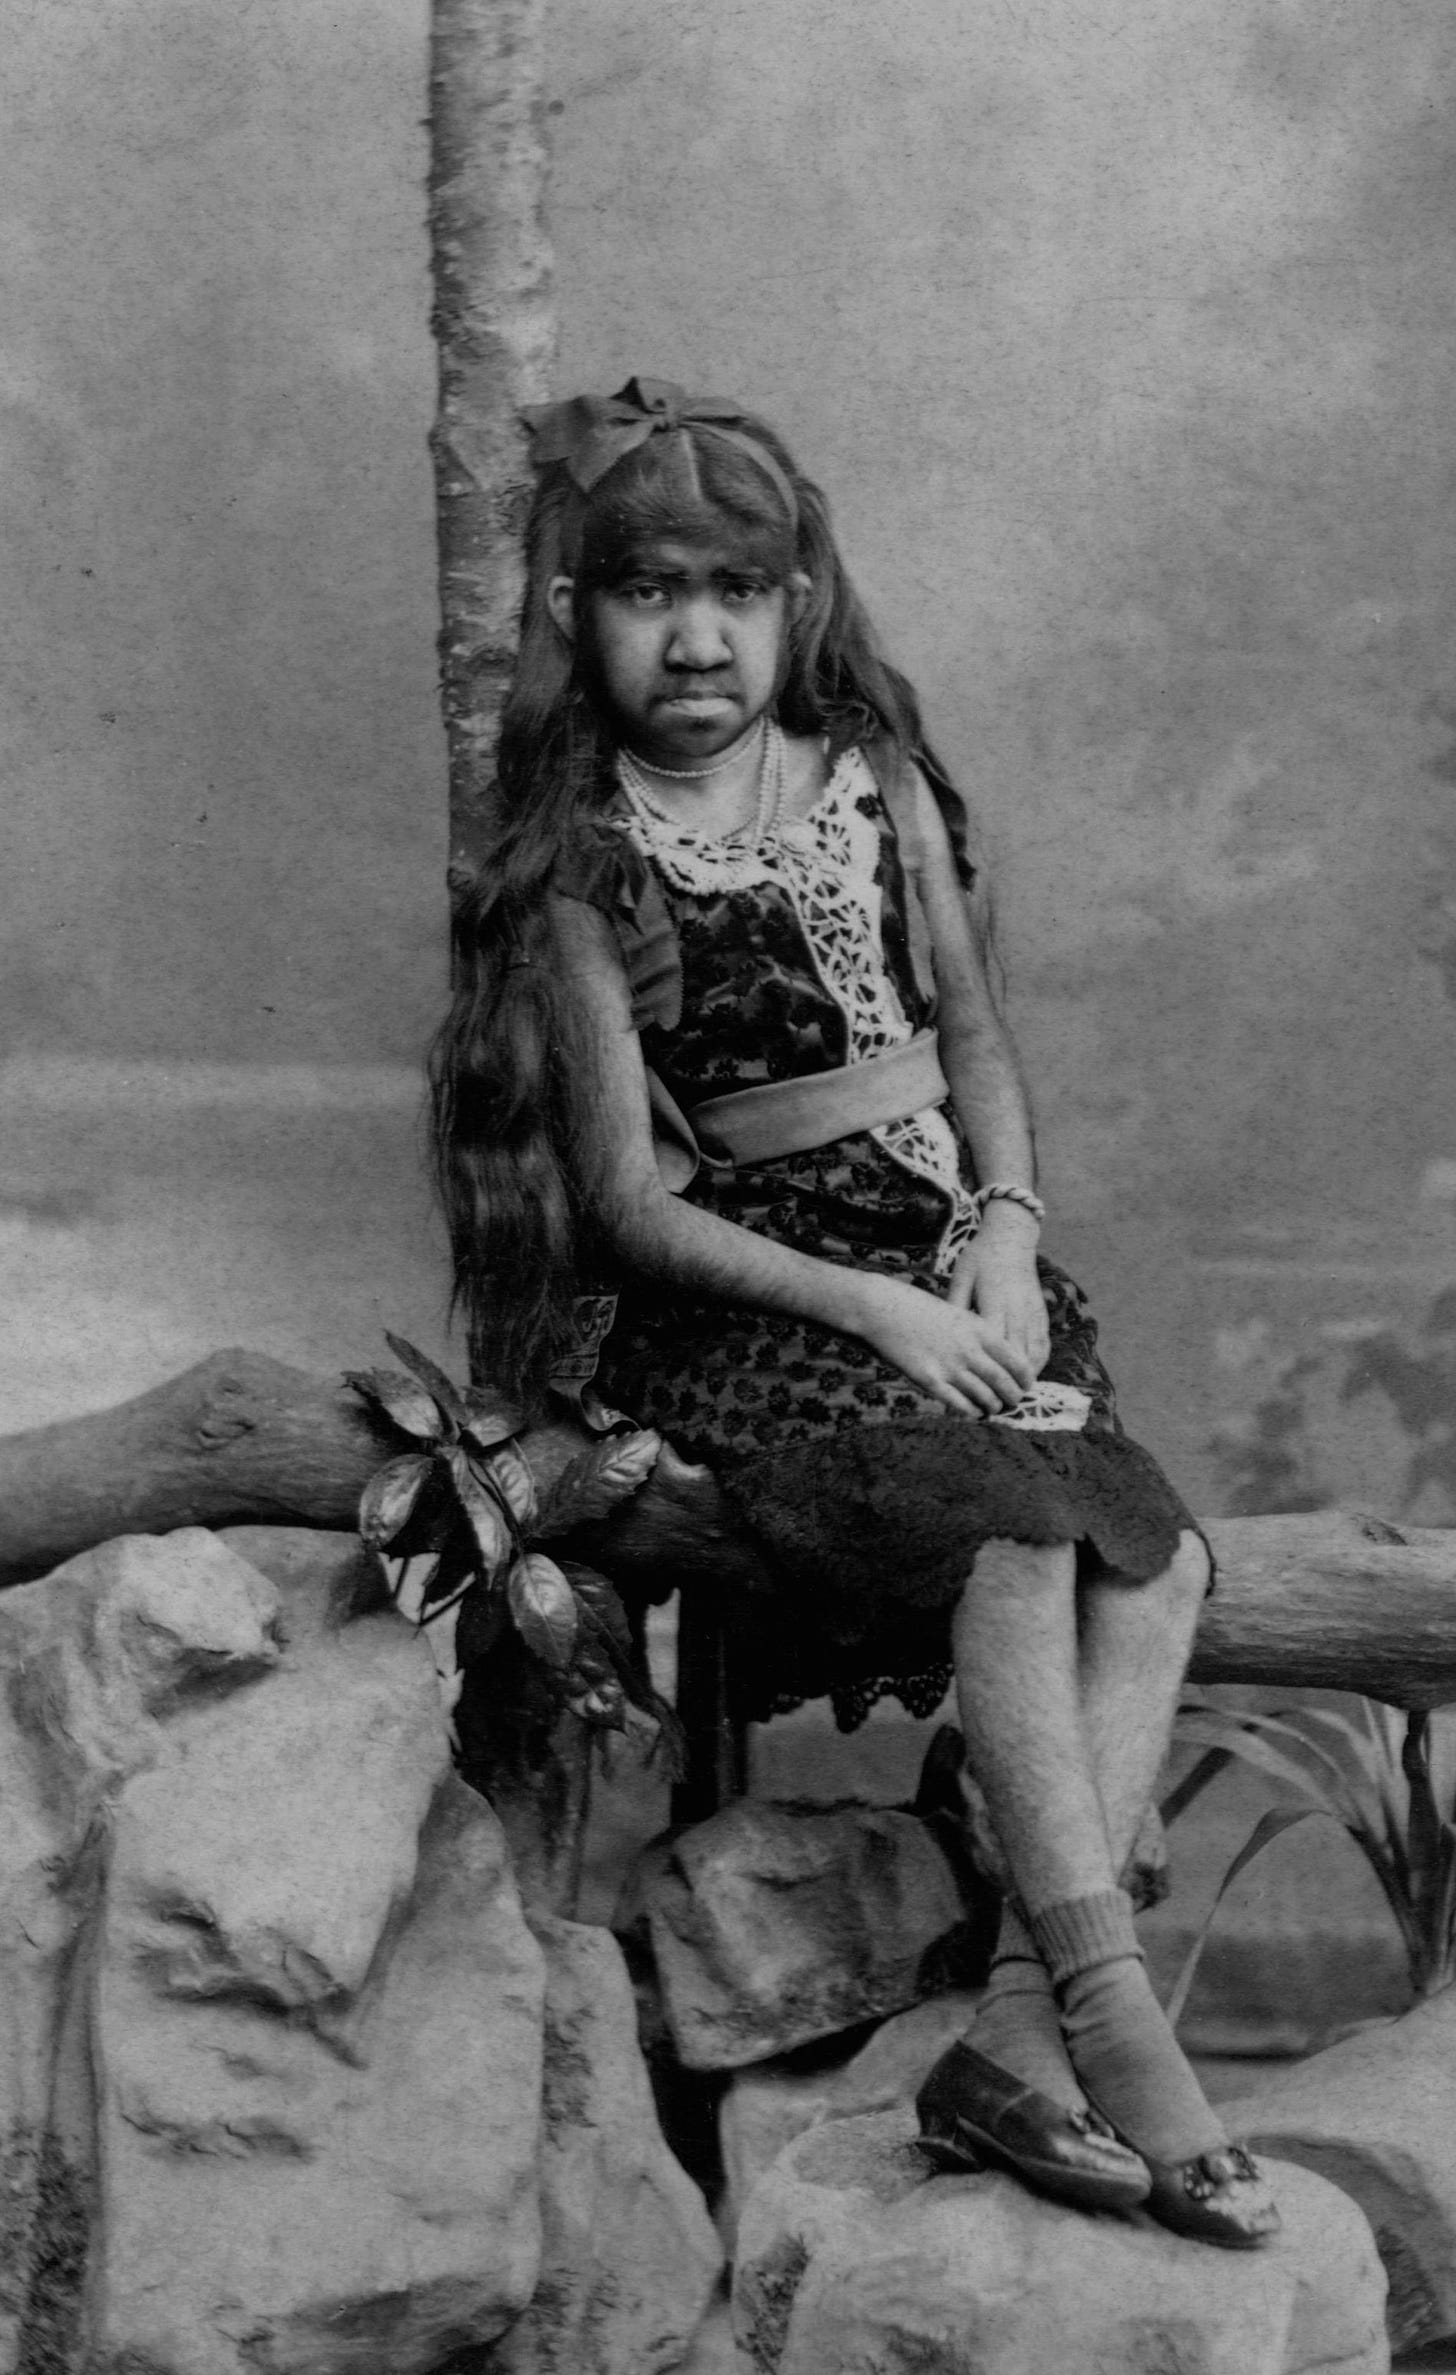  Krao Farini was an hirsute, flexibly jointed woman found in the Laotian jungle in 1885 and cruelly exhibited as 'the missing link'